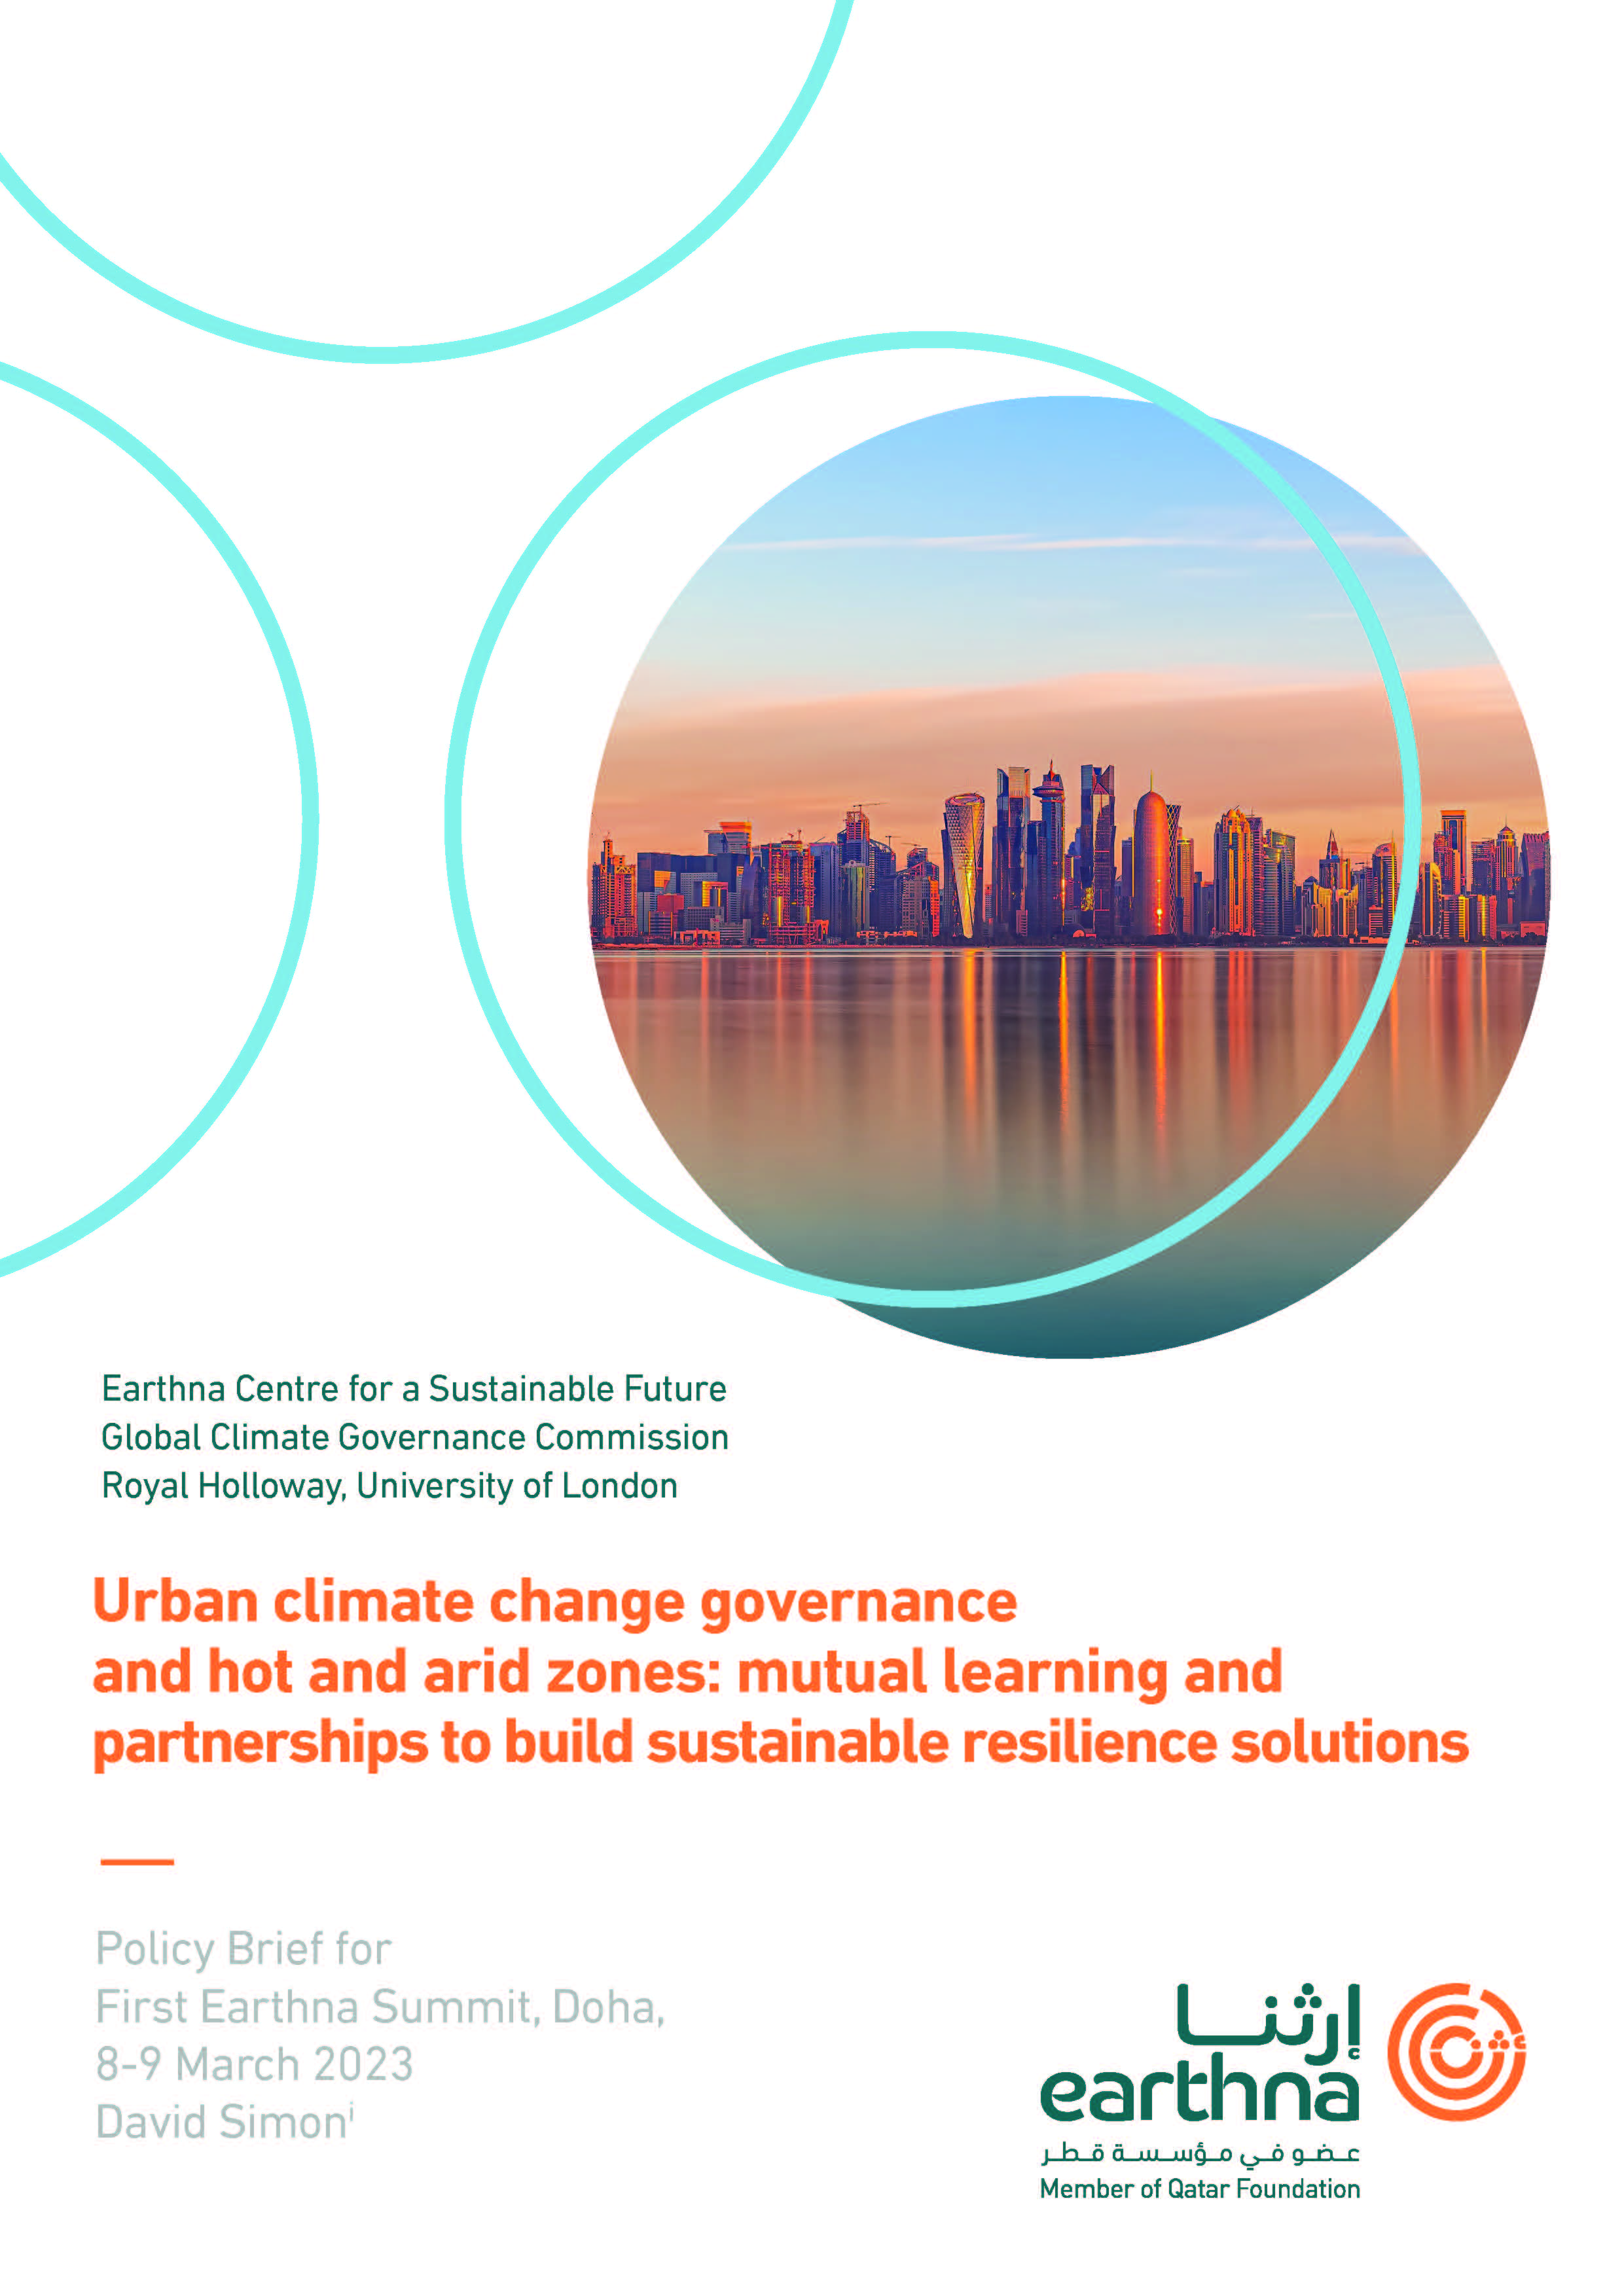 Urban climate change governance and hot and arid zones: mutual learning and partnerships to build sustainable resilience solutions